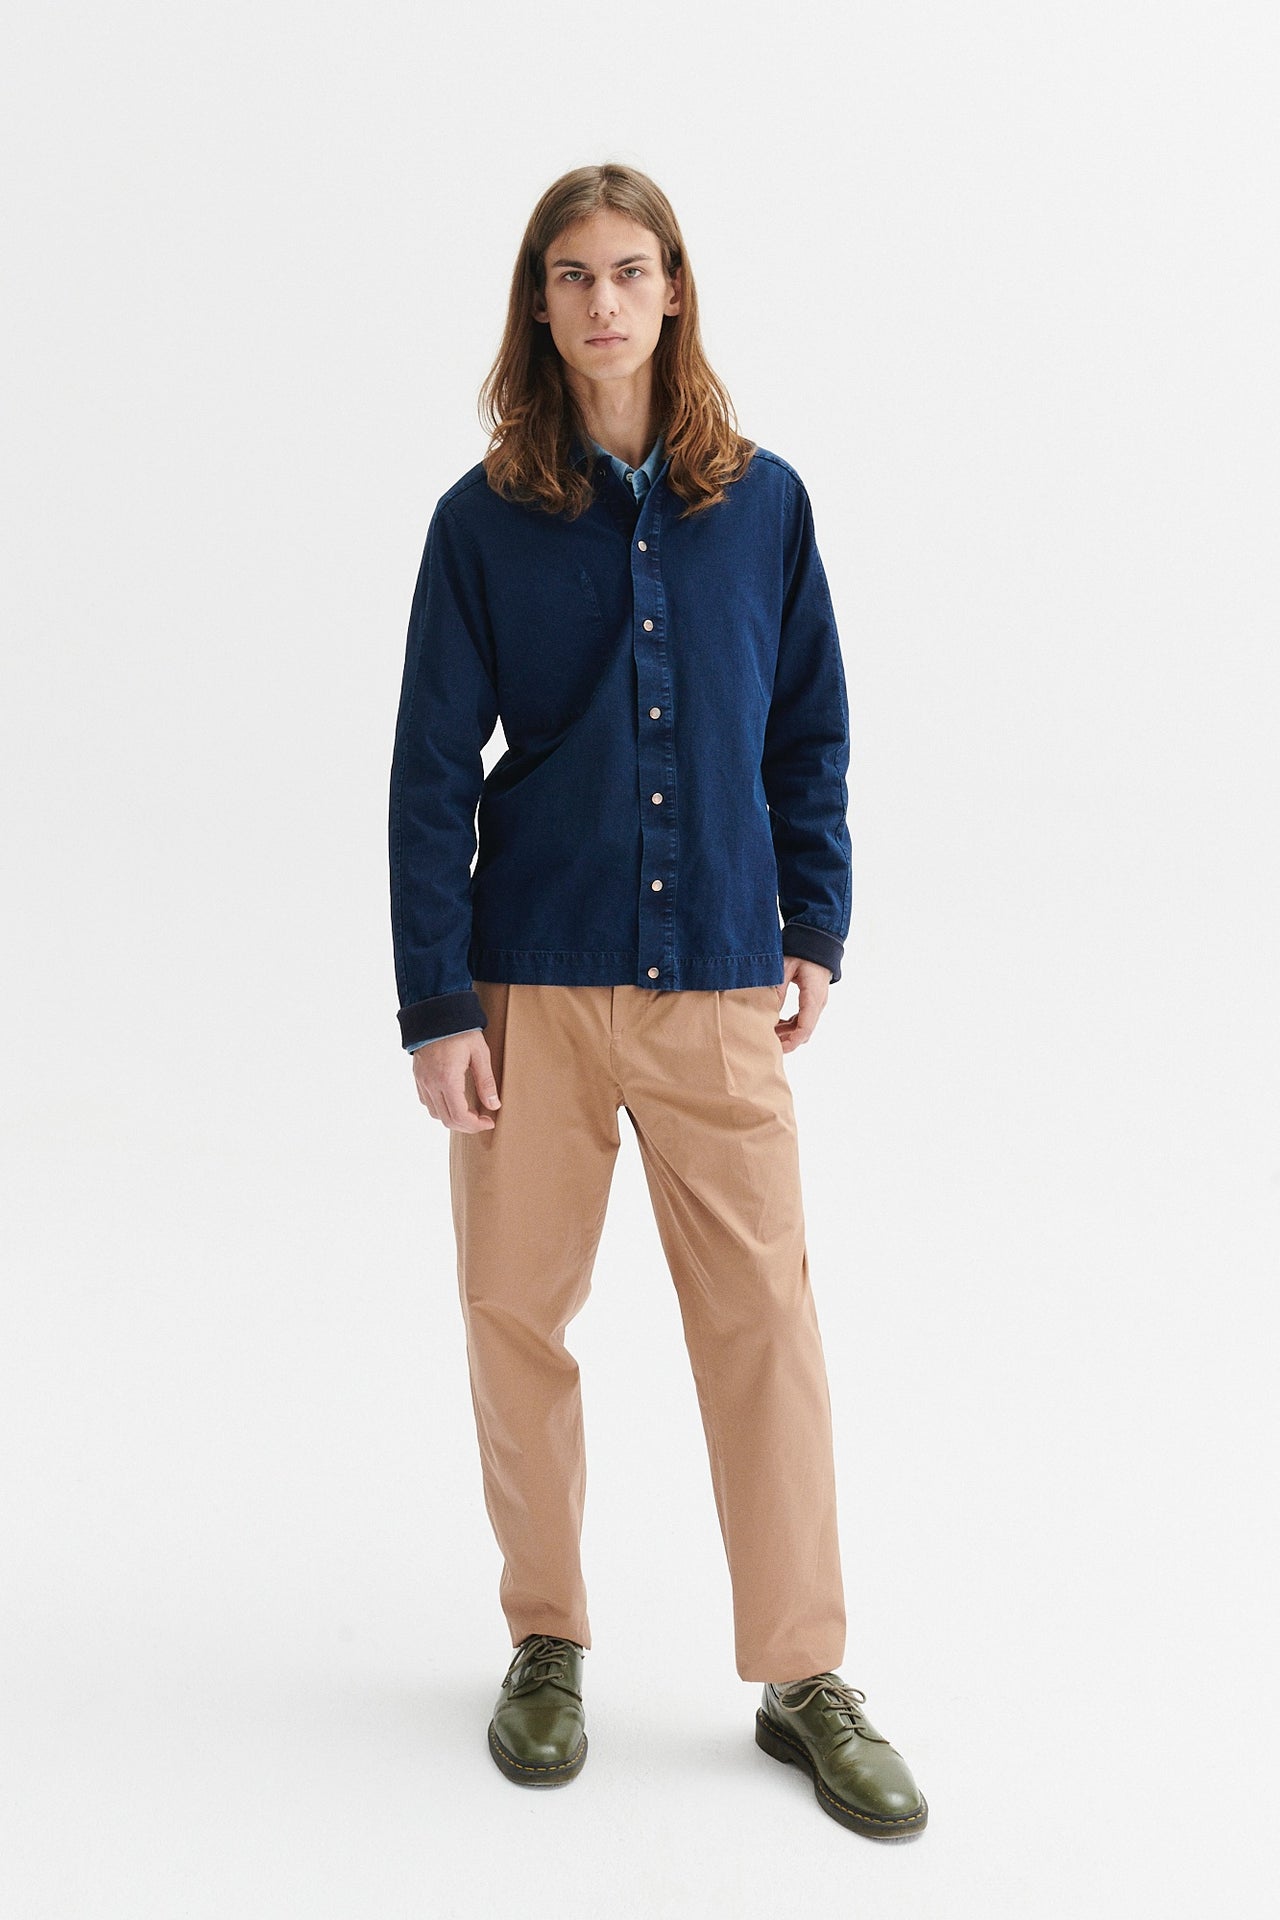 Overshirt in a Blue Pre Washed Japanese Cotton Denim